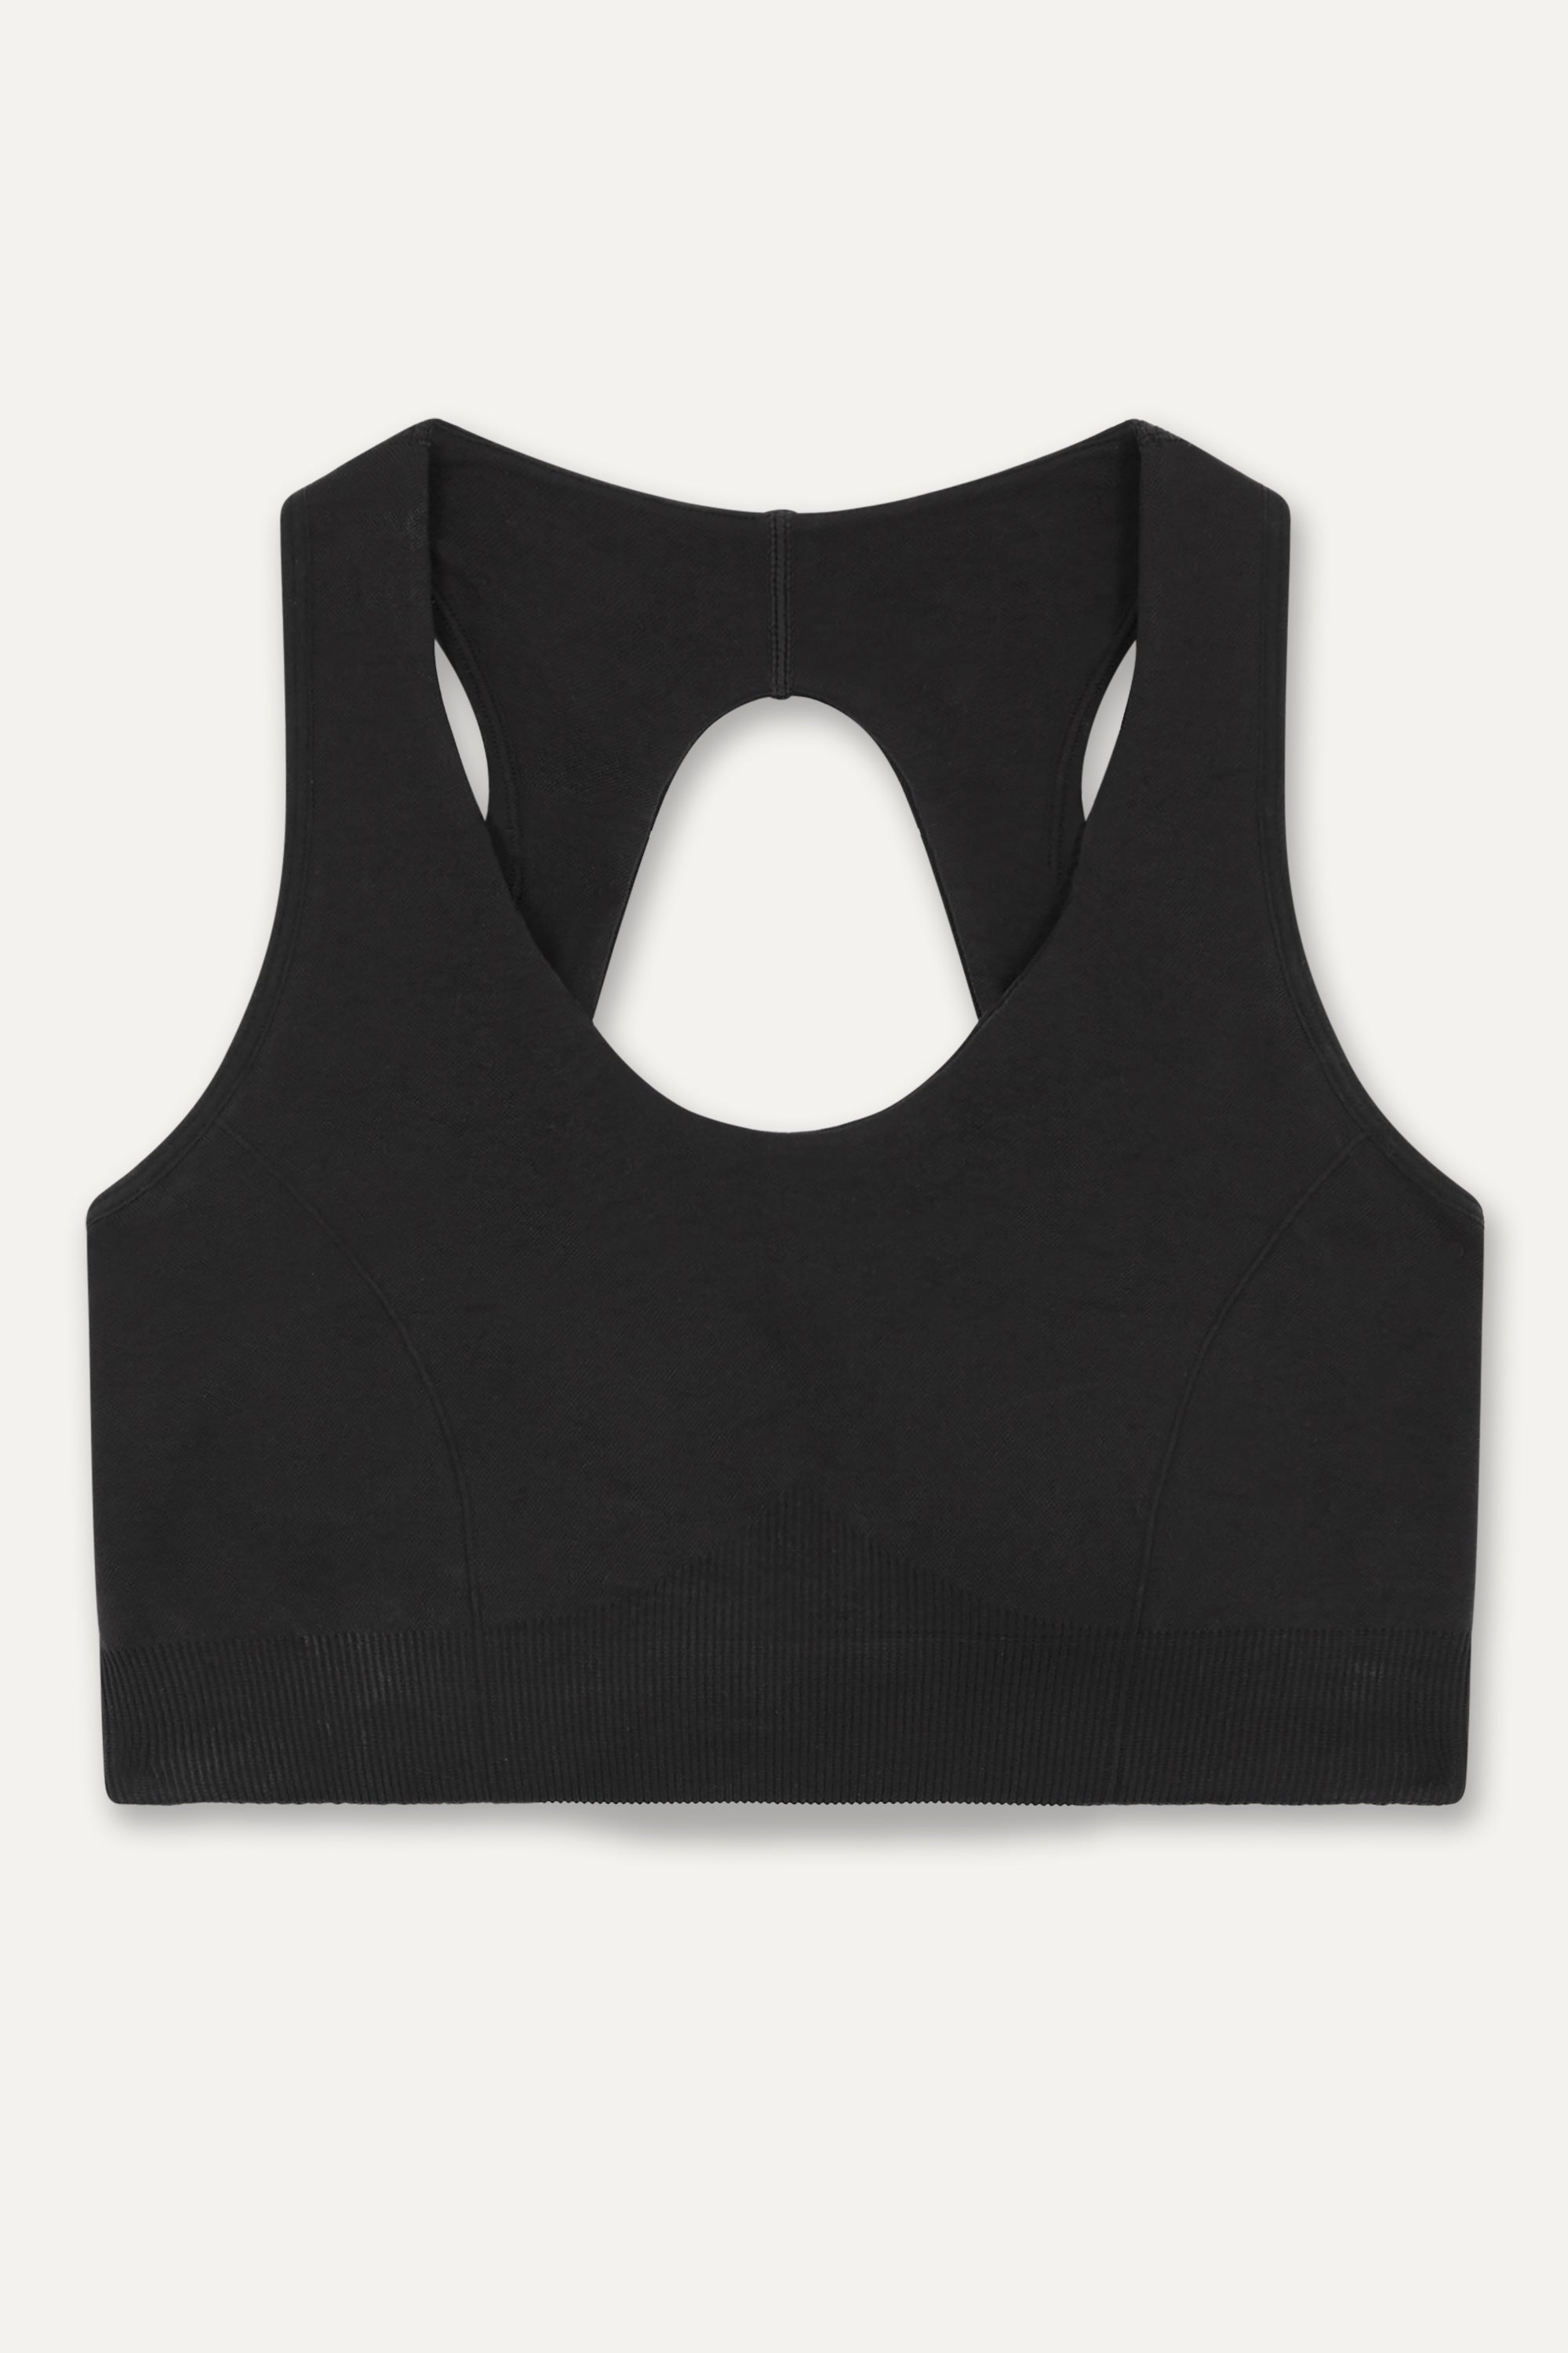 Black recycled supportive sports bra and black leggings from sustainable women's activewear brand, Jilla.  